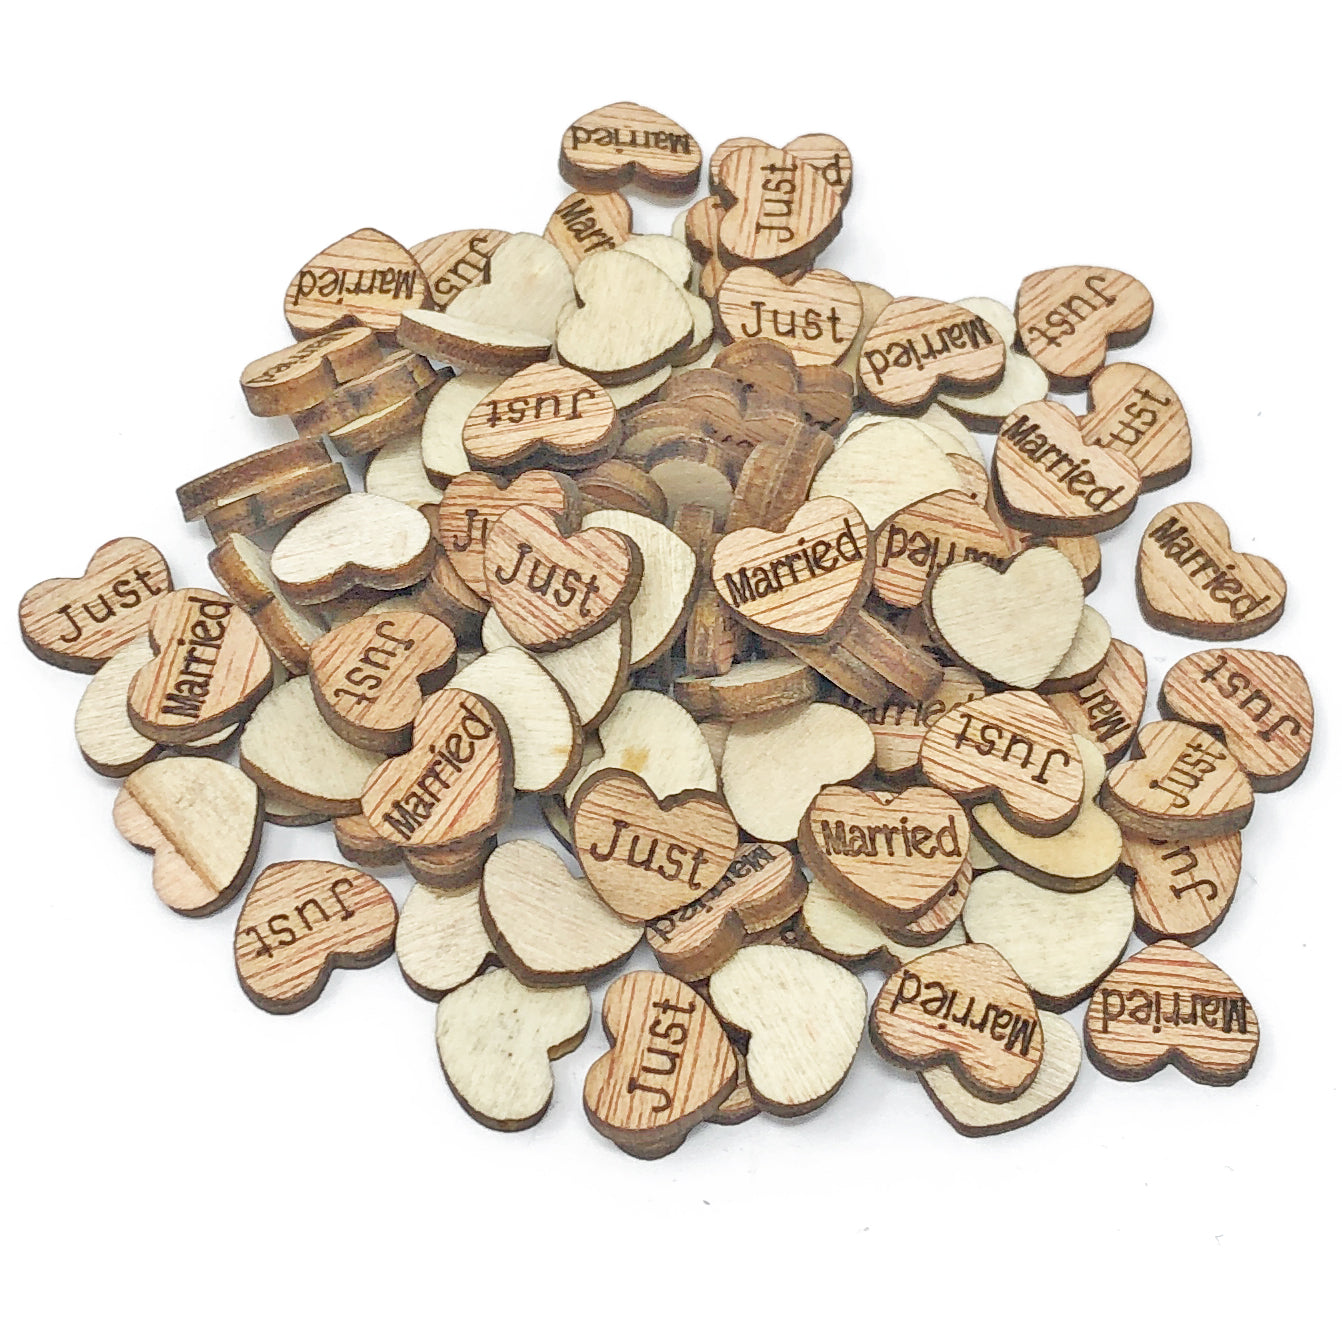 Just Married 10mm Natural Wooden Wedding Love Hearts